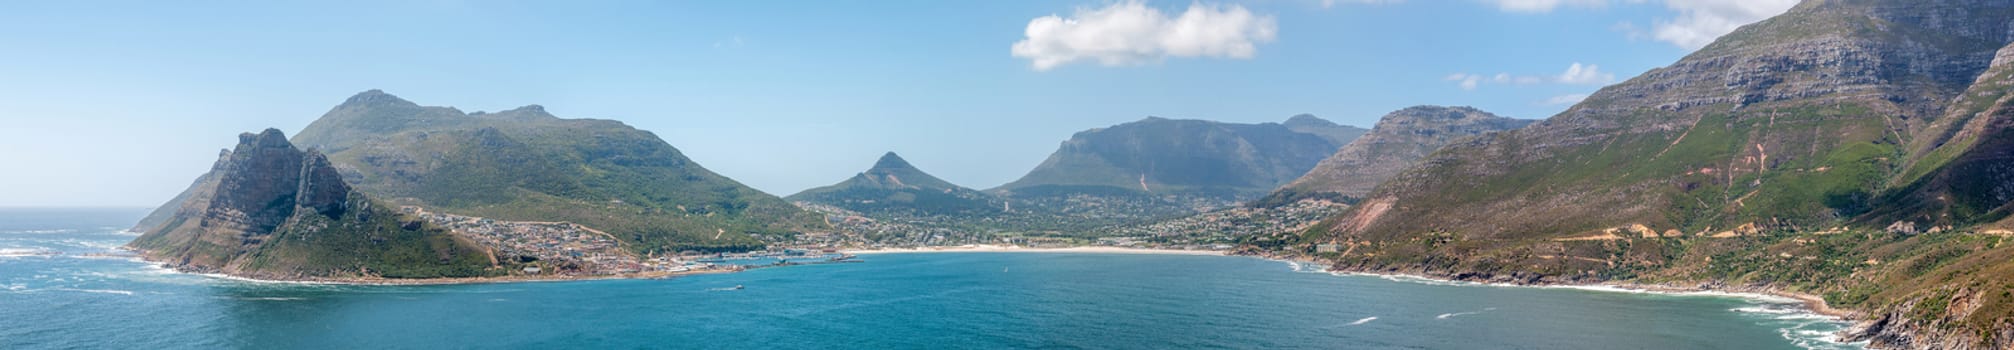 Panorama of Hout Bay harbor and town. Chapmans Peak Drive is visible to the right